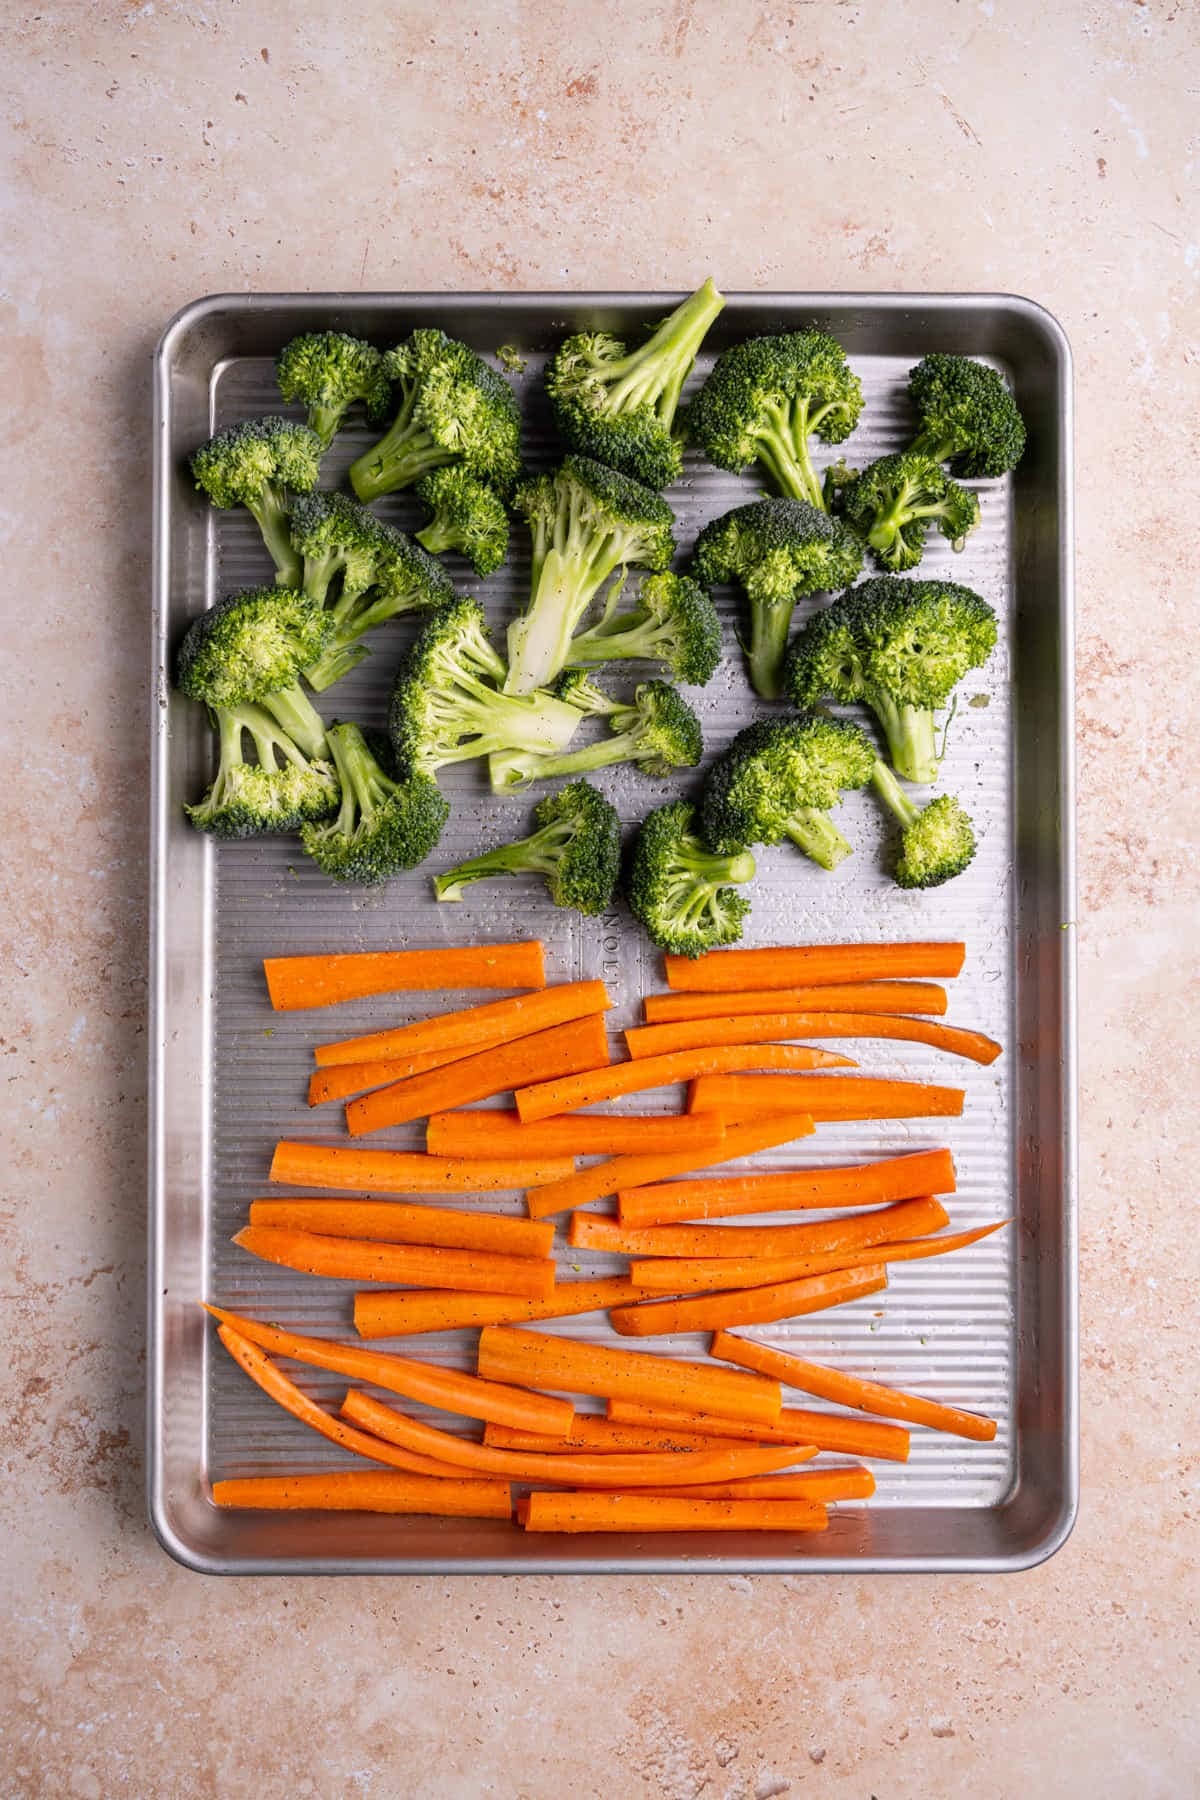 Baking sheet with prepped broccoli and carrots coated in olive oil, salt, and pepper